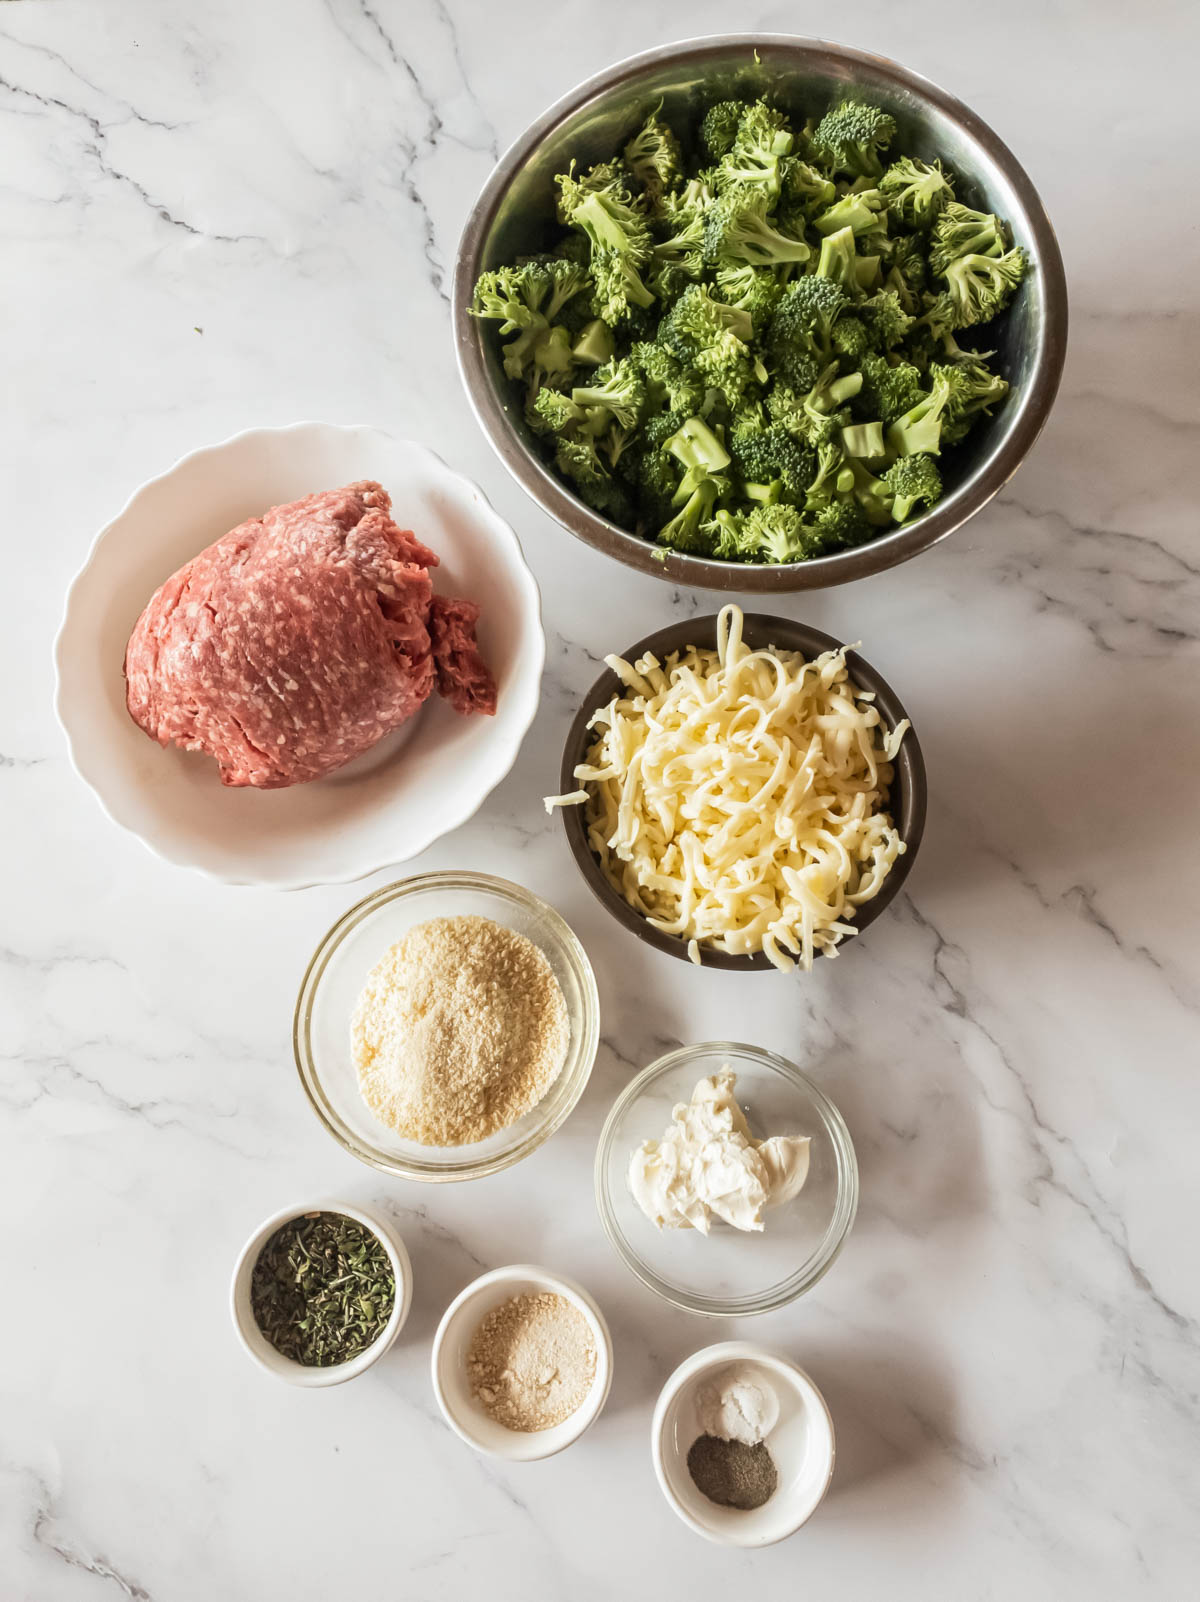 Ingredients for hamburger broccoli casserole on a marble countertop.